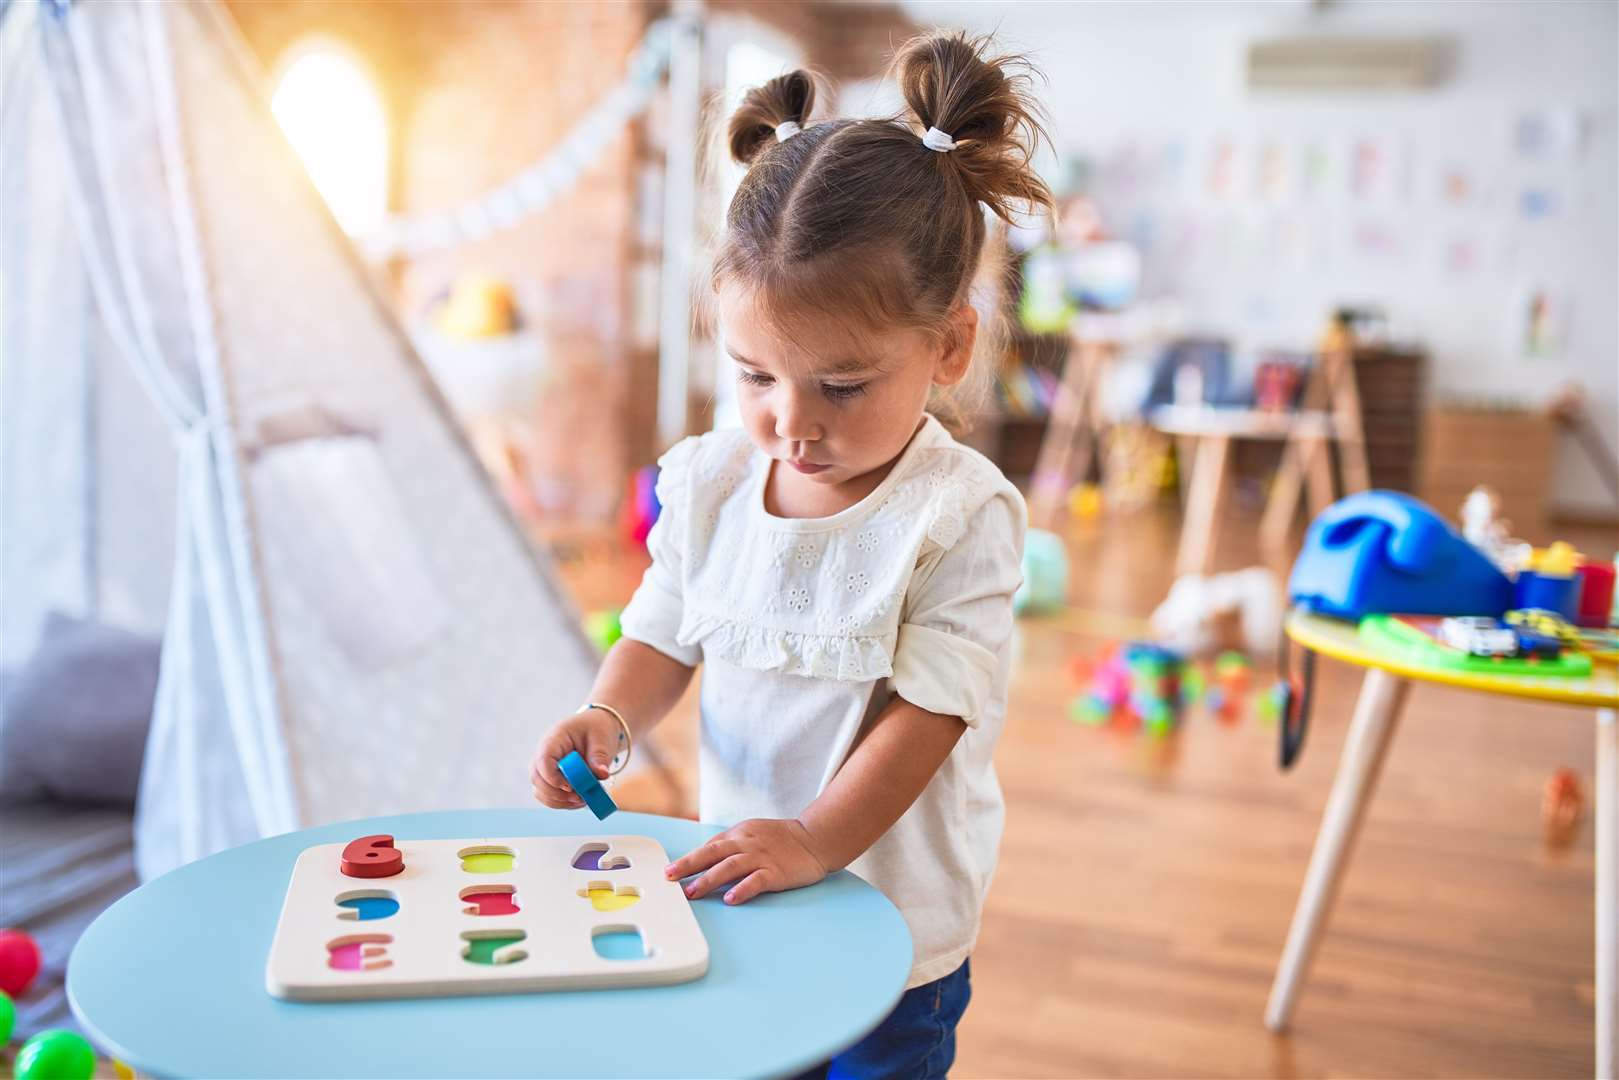 Pre-schools and nurseries are a vital part of a child's early learning development. Stock image.